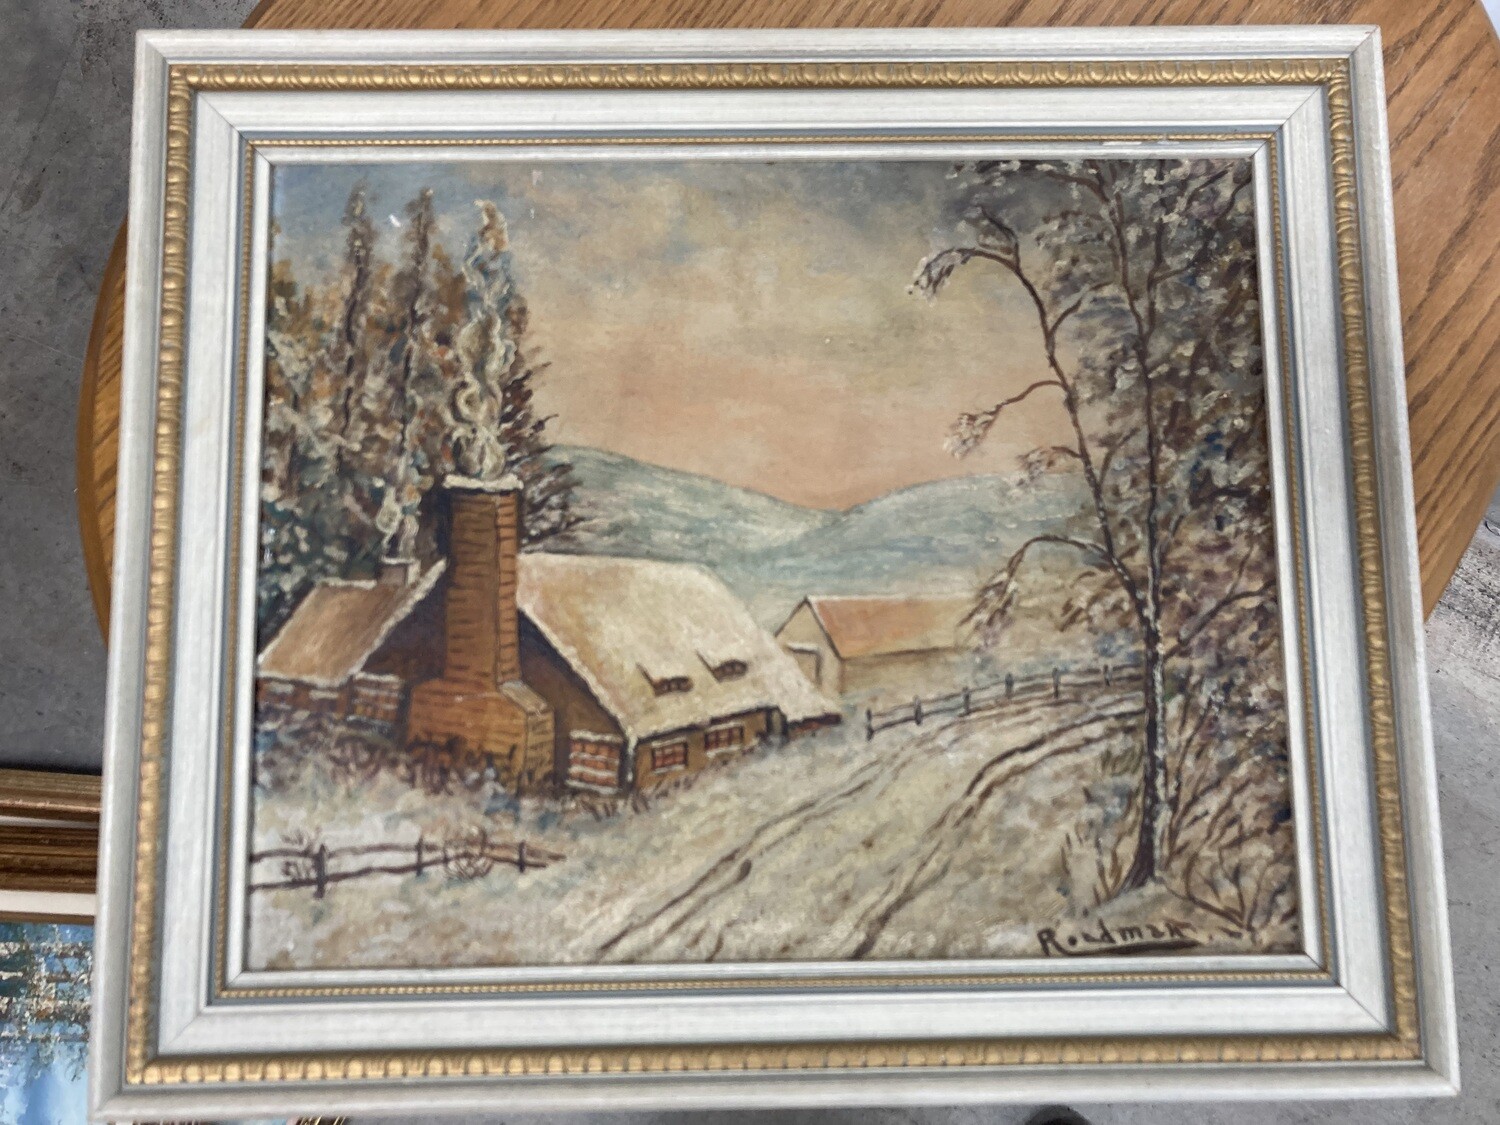 Framed Art: Farmhouse in Snowy Hills #2314 ** 9 mos. to sell, clearance